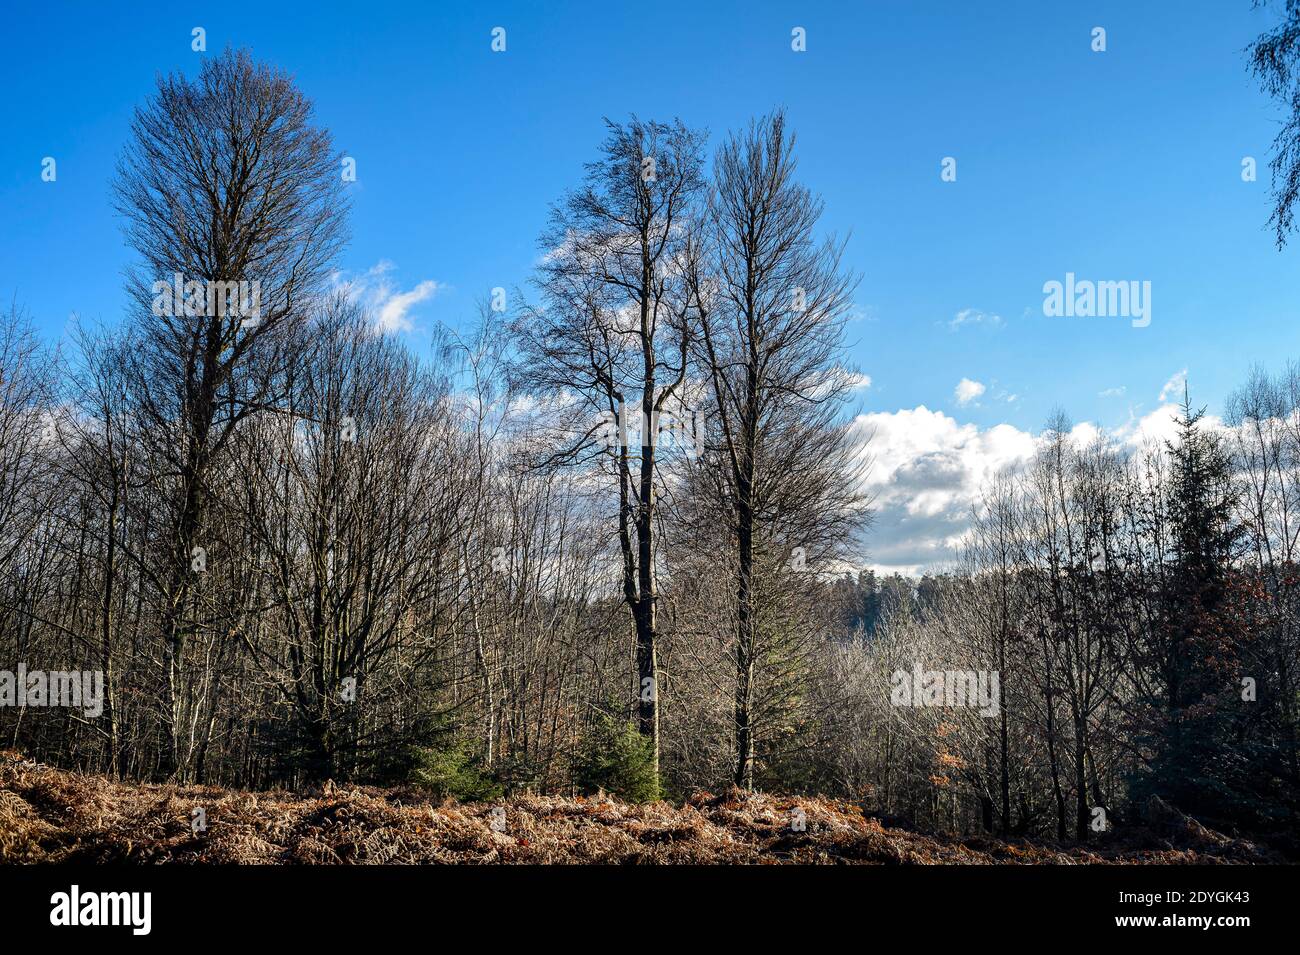 Winter forest in the Vosges, France - The great beeches of the mountain forest have lost their foliage. Bare branches rise in the blue winter sky. Stock Photo